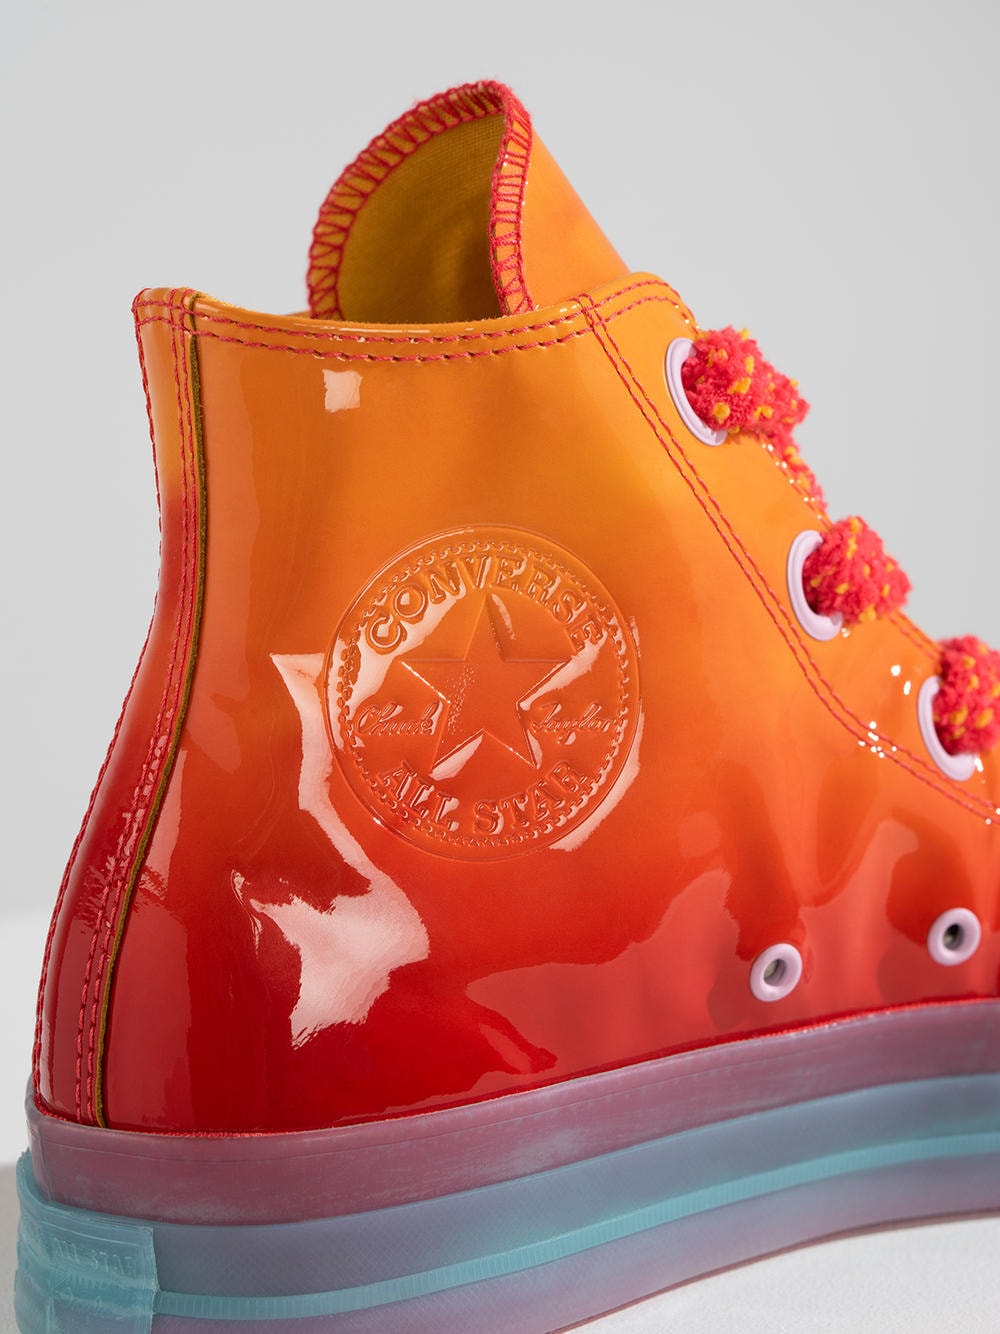 JW Anderson x Converse Toy Collection Glossy Chuck Taylor All Star 70 Pop-Up London